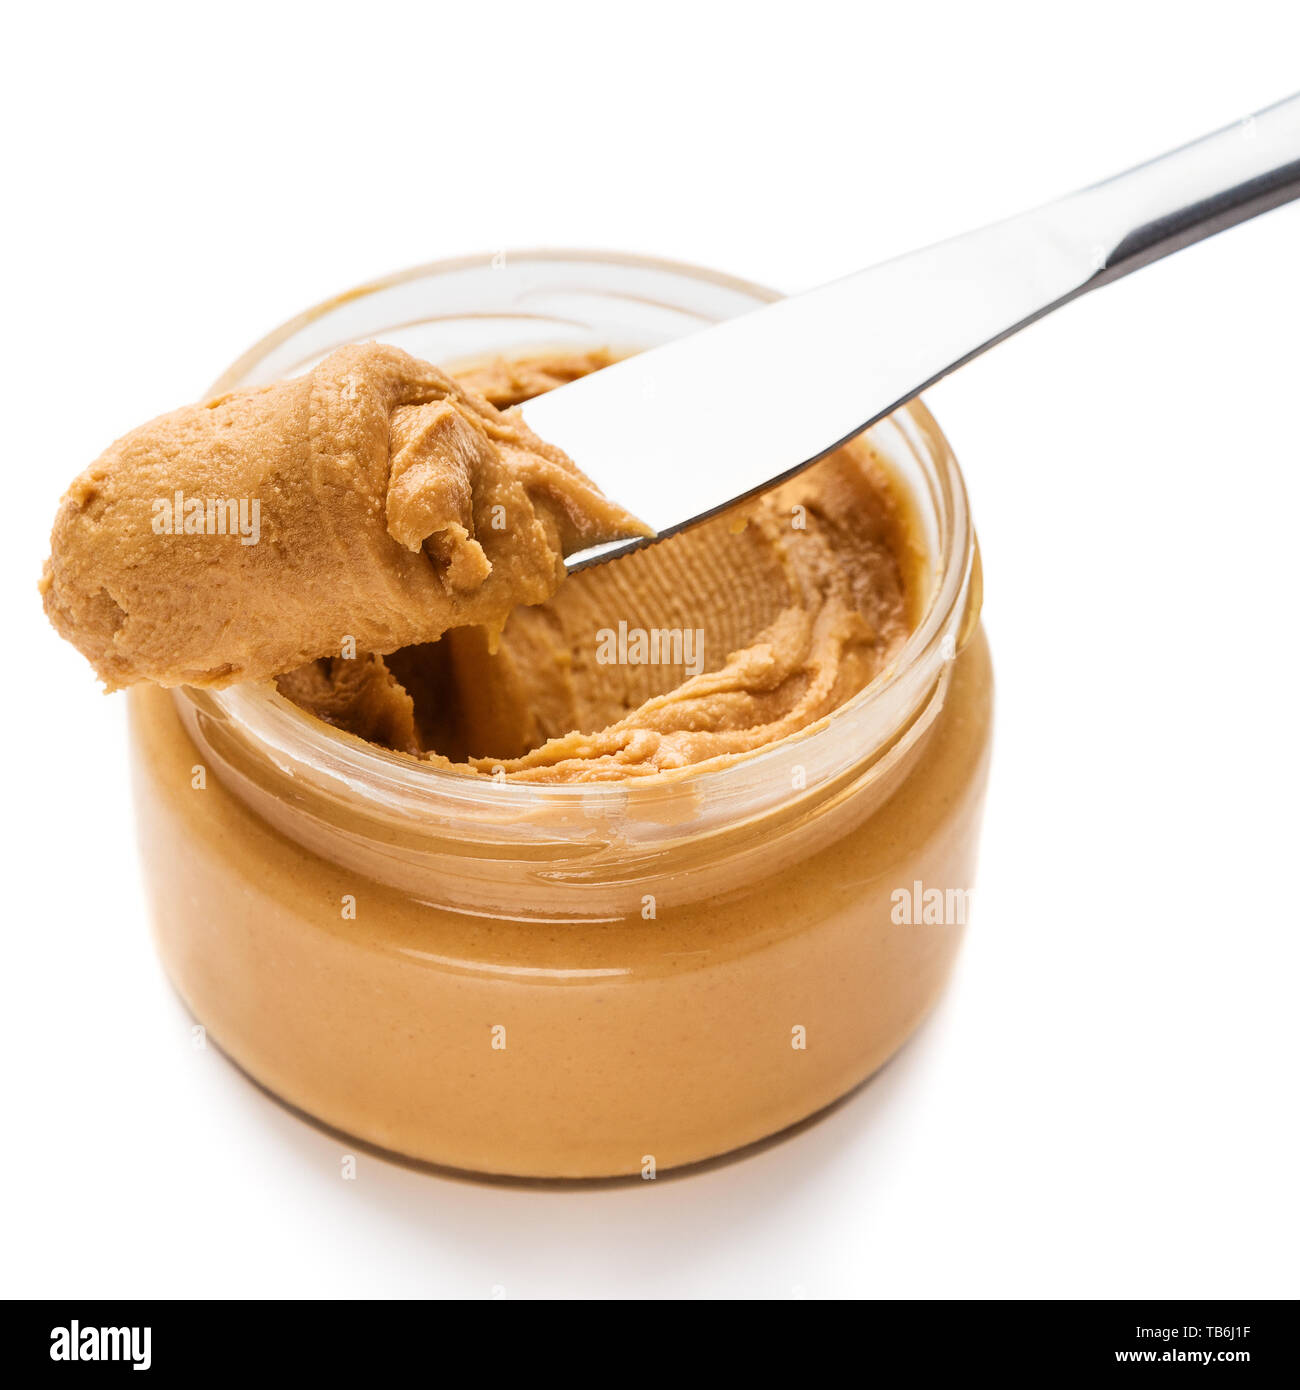 https://c8.alamy.com/comp/TB6J1F/jar-with-peanut-butter-and-knife-butter-smear-isolated-on-white-background-ameriacan-dessert-concept-TB6J1F.jpg